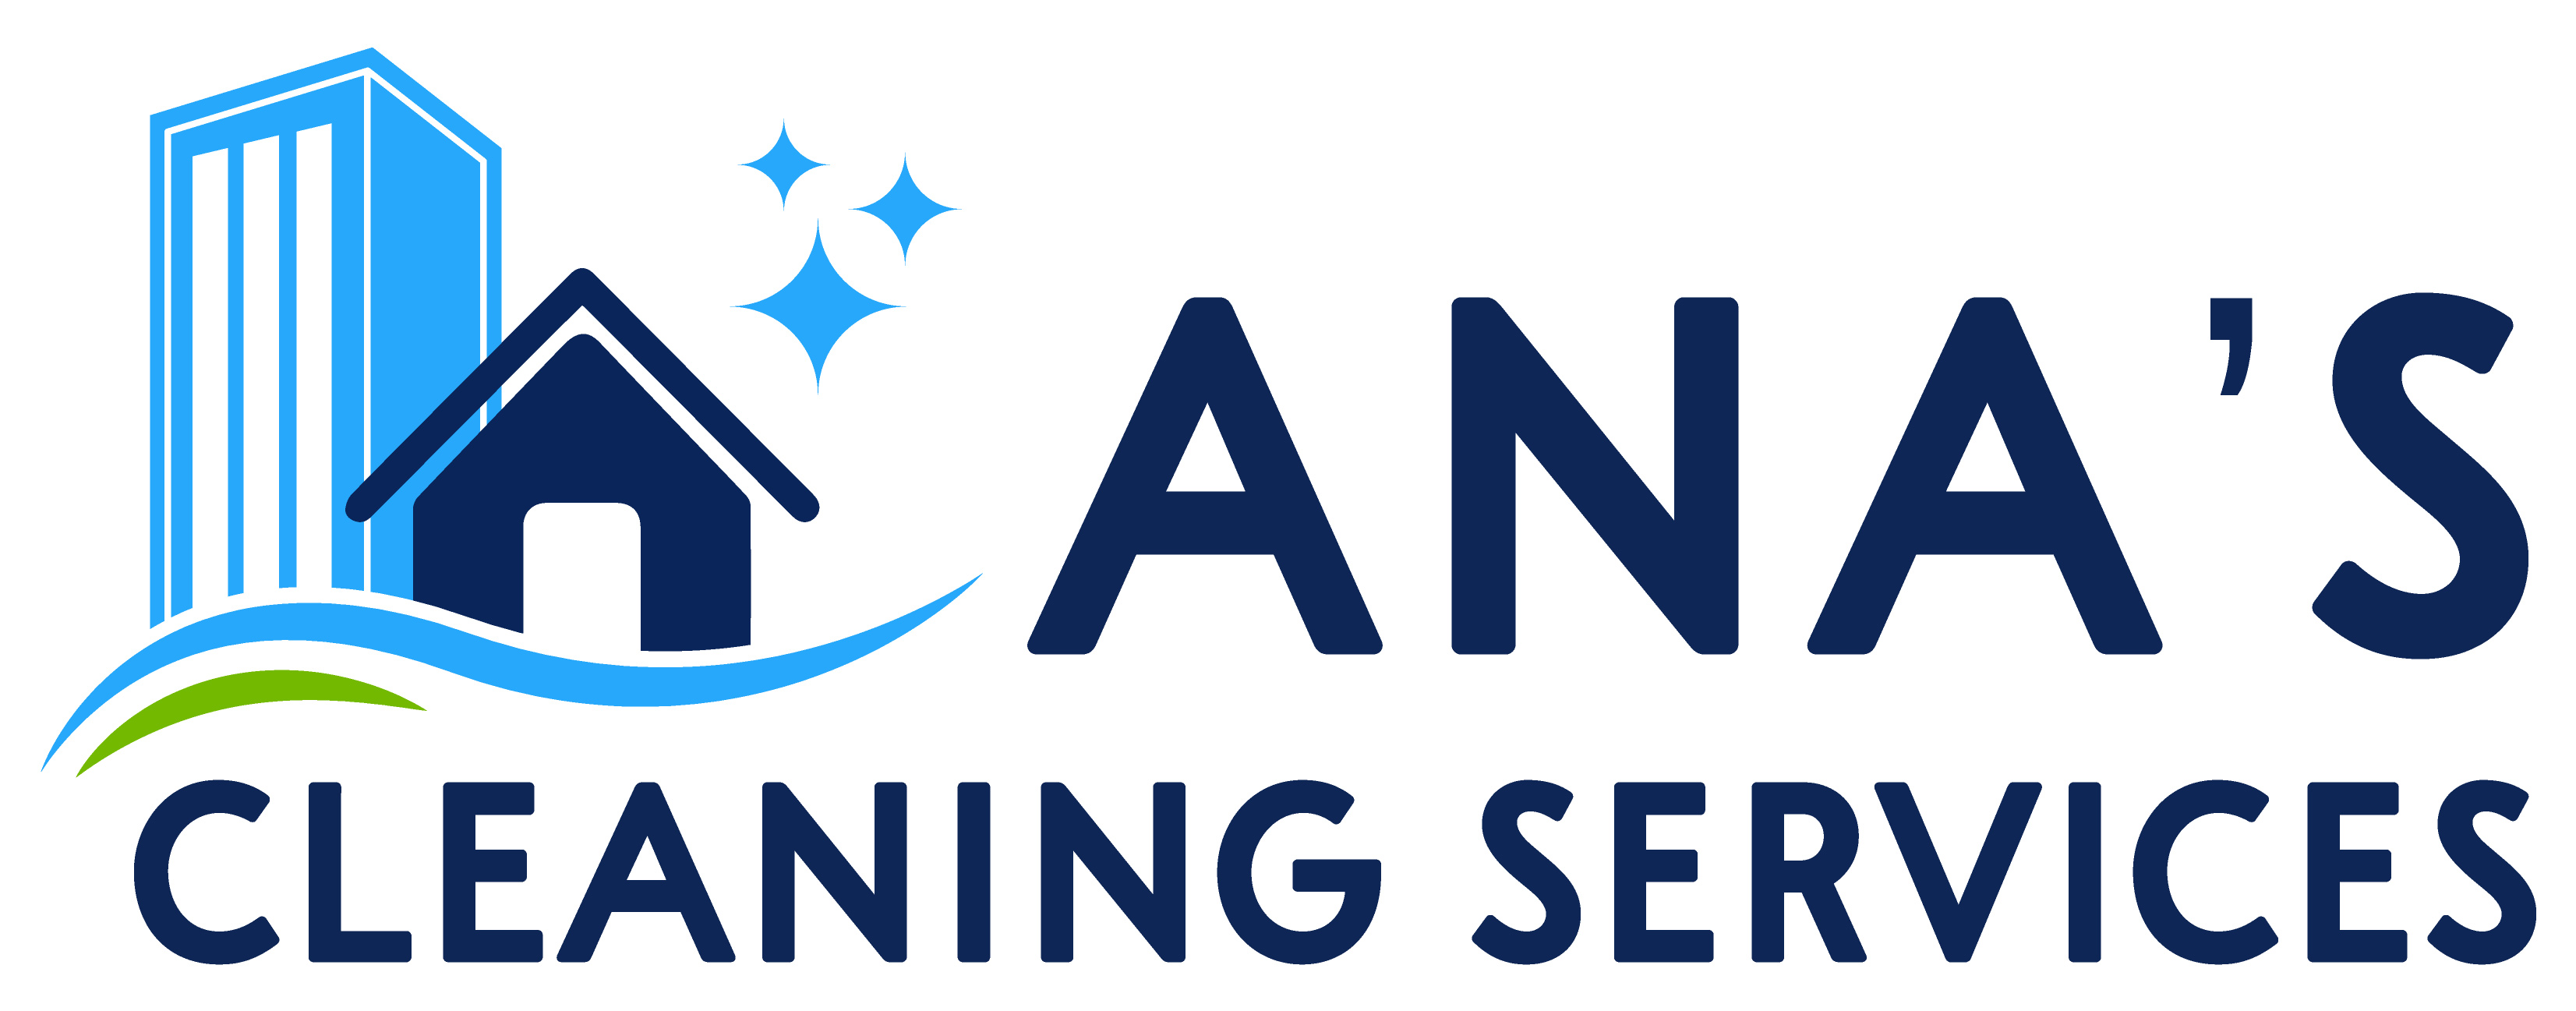 Ana's Cleaning Services, LLC Logo